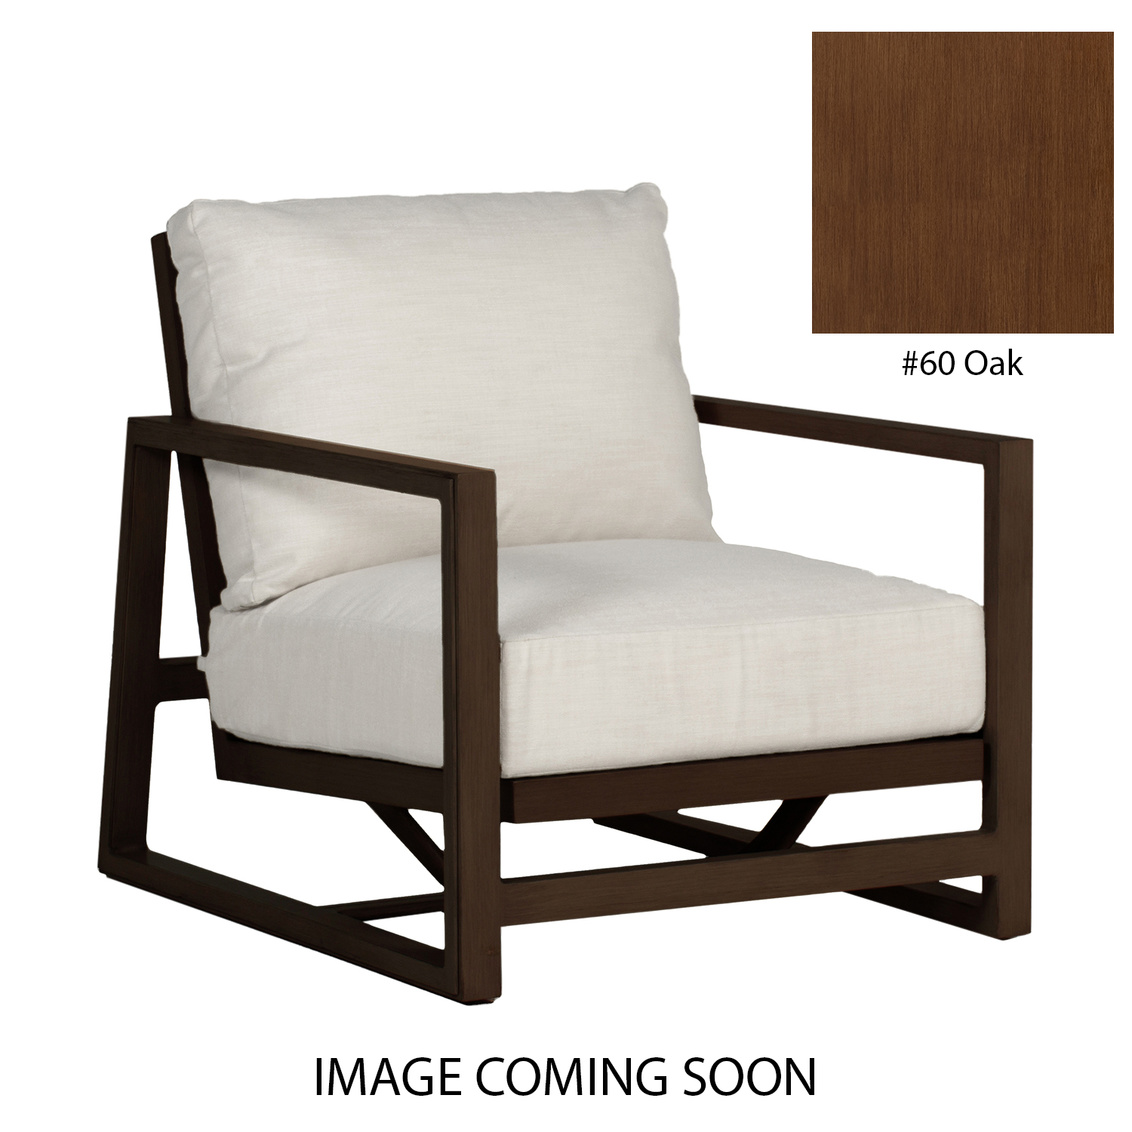 avondale aluminum spring lounge in oak – frame only product image